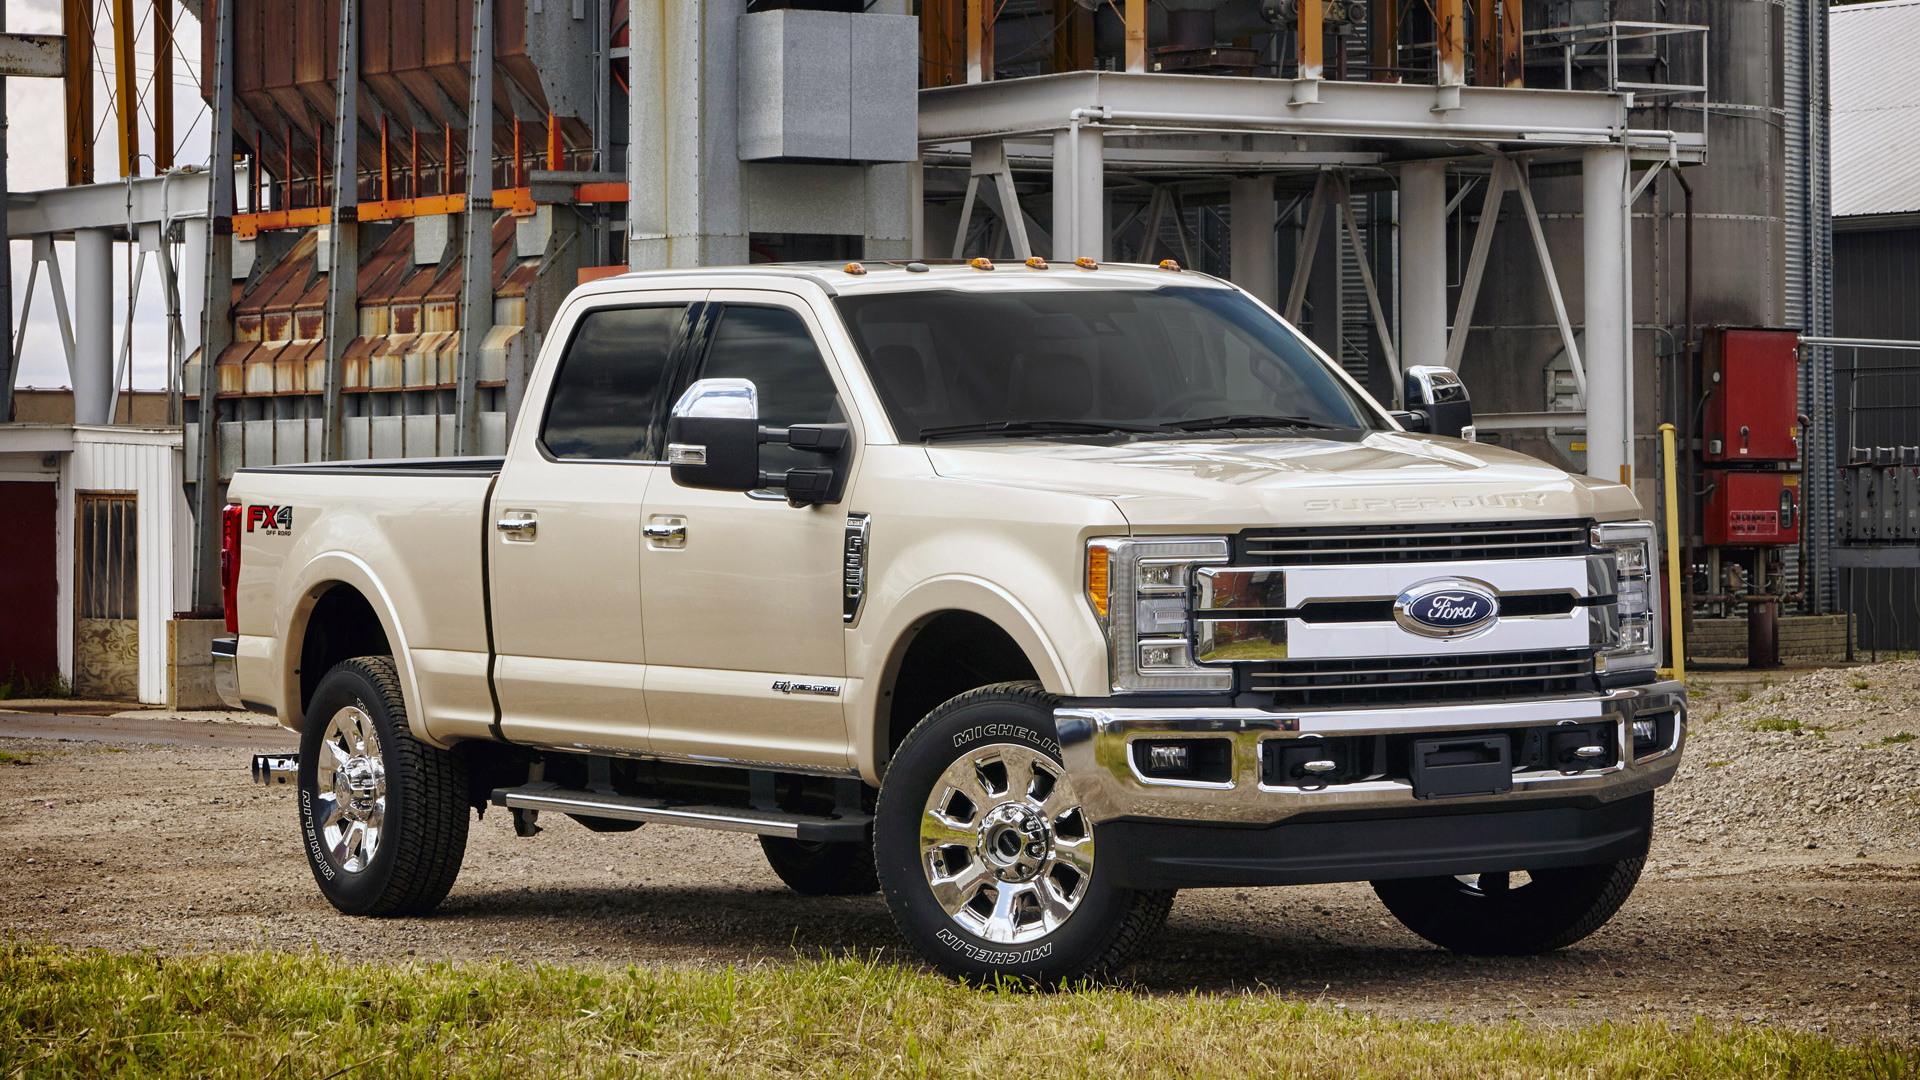 Aluminum-Bodied 2017 Ford F-Series Super Duty Rolls In